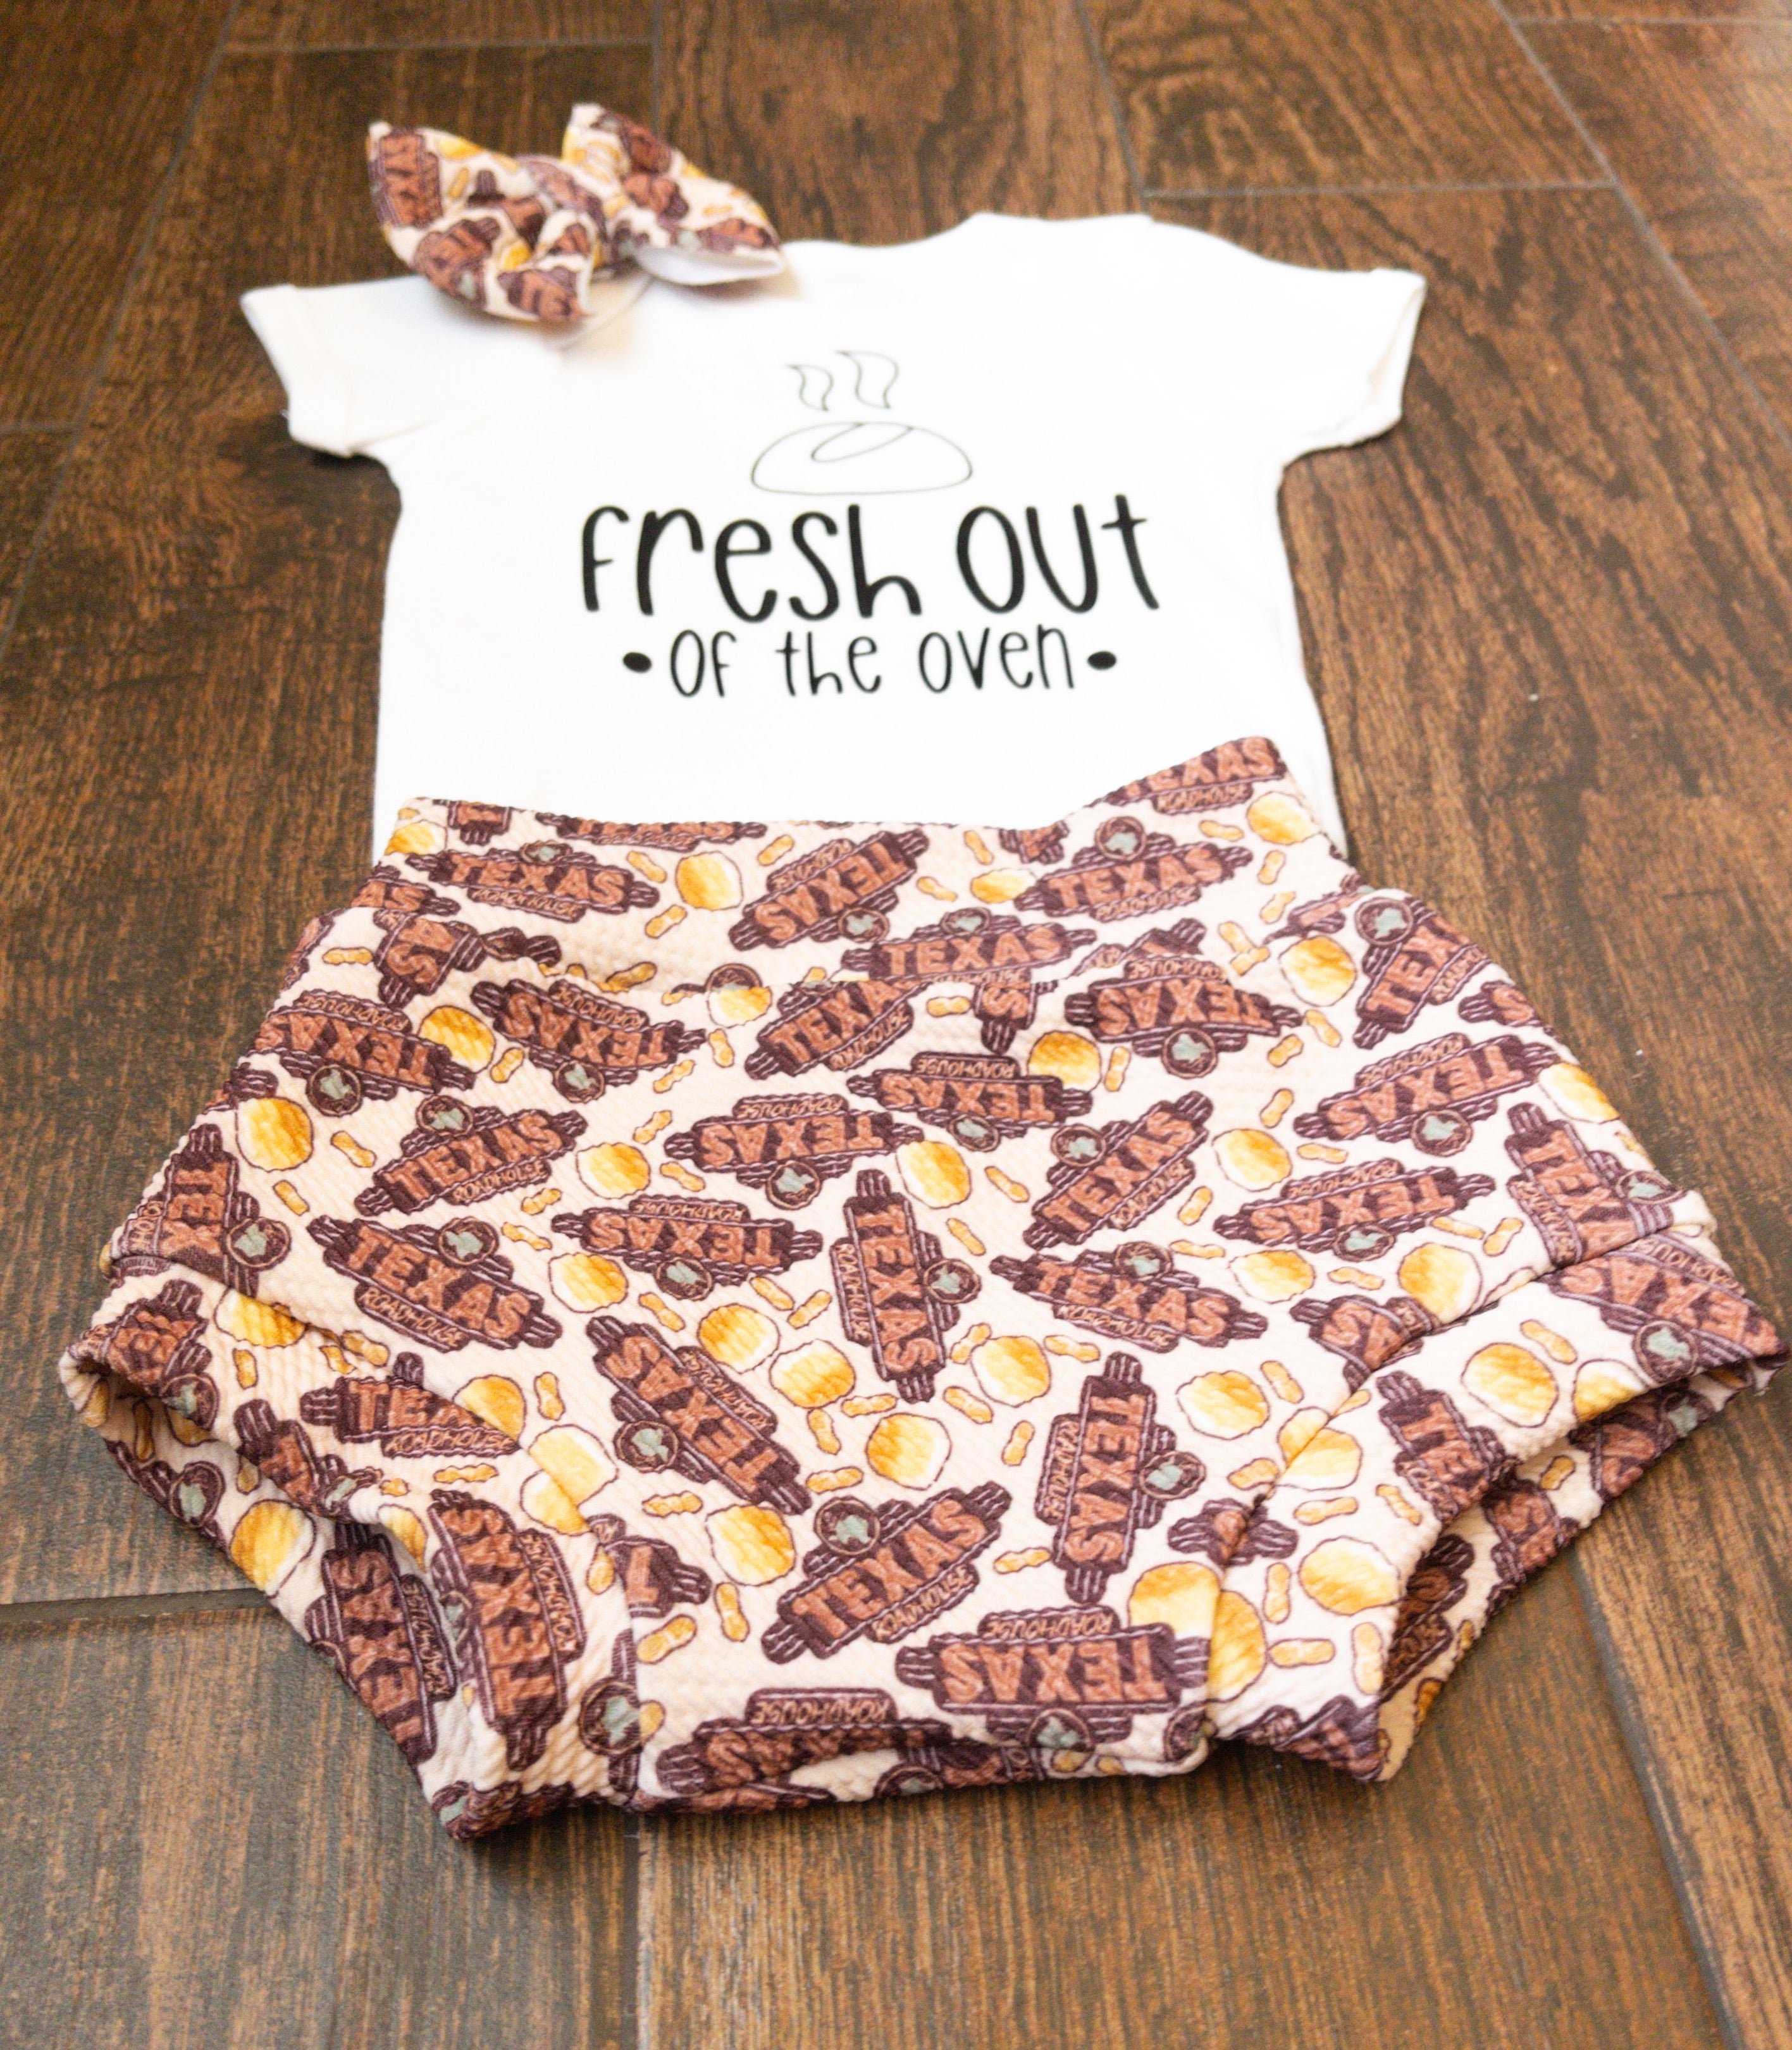 Bun’s Hot Out the Oven Baby Girl Outfit